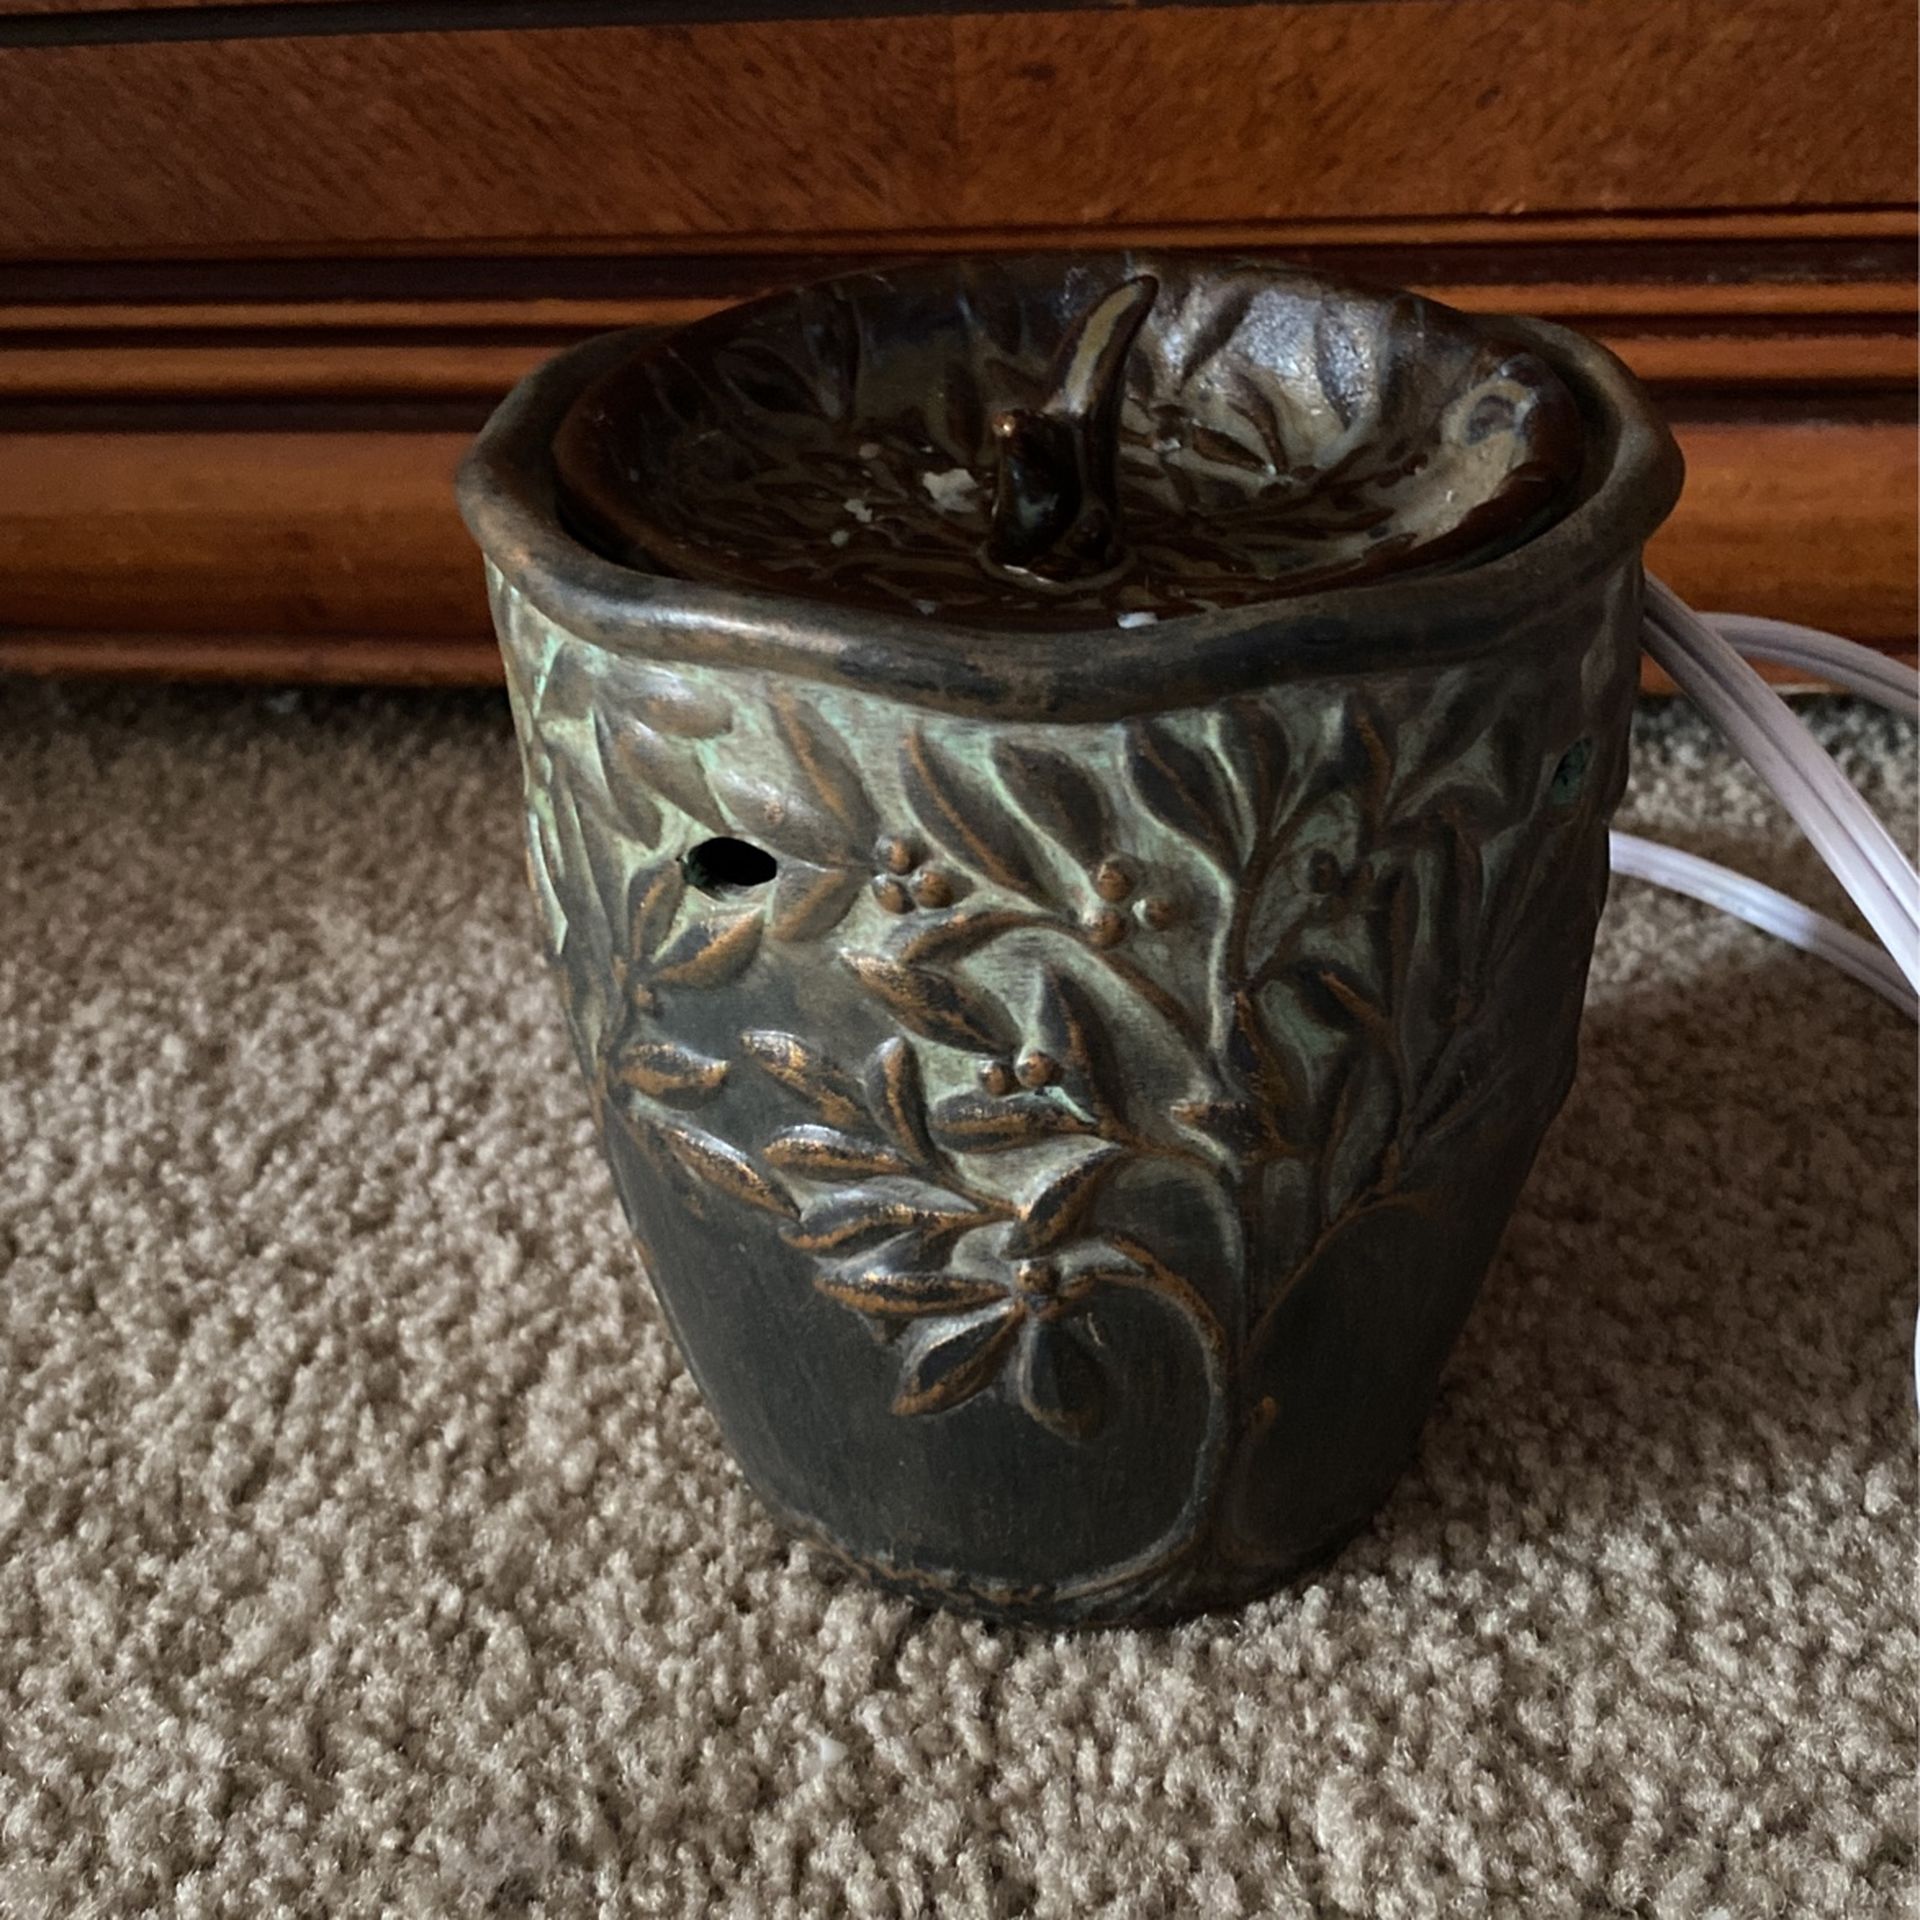 Scentsy Oil/candle Warmer Heritage Tree design 